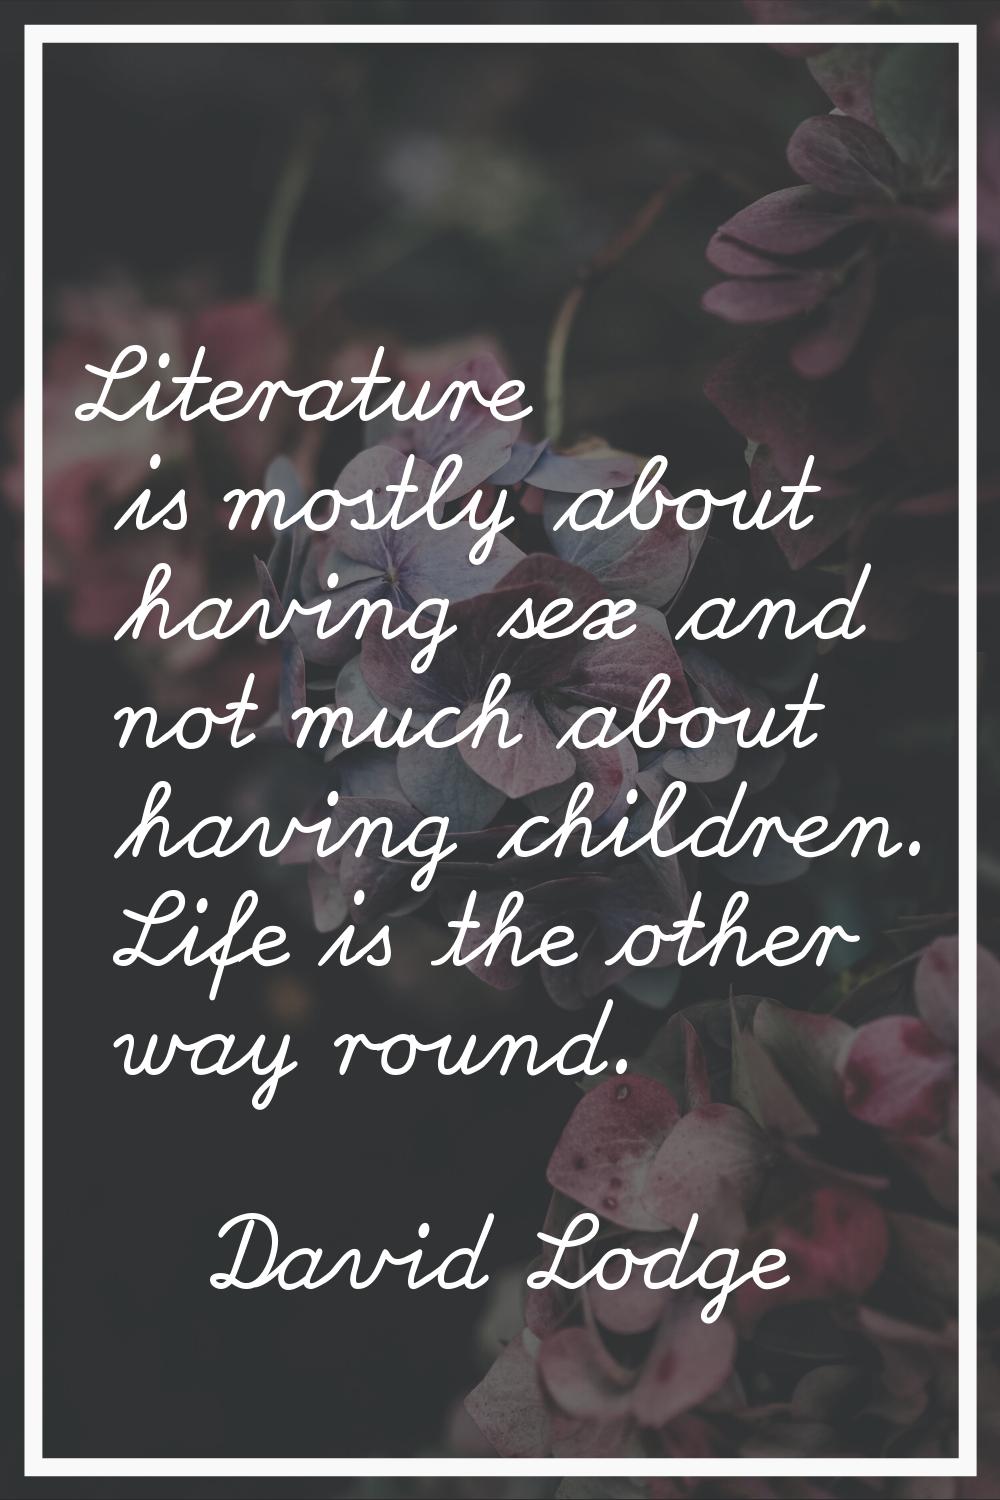 Literature is mostly about having sex and not much about having children. Life is the other way rou